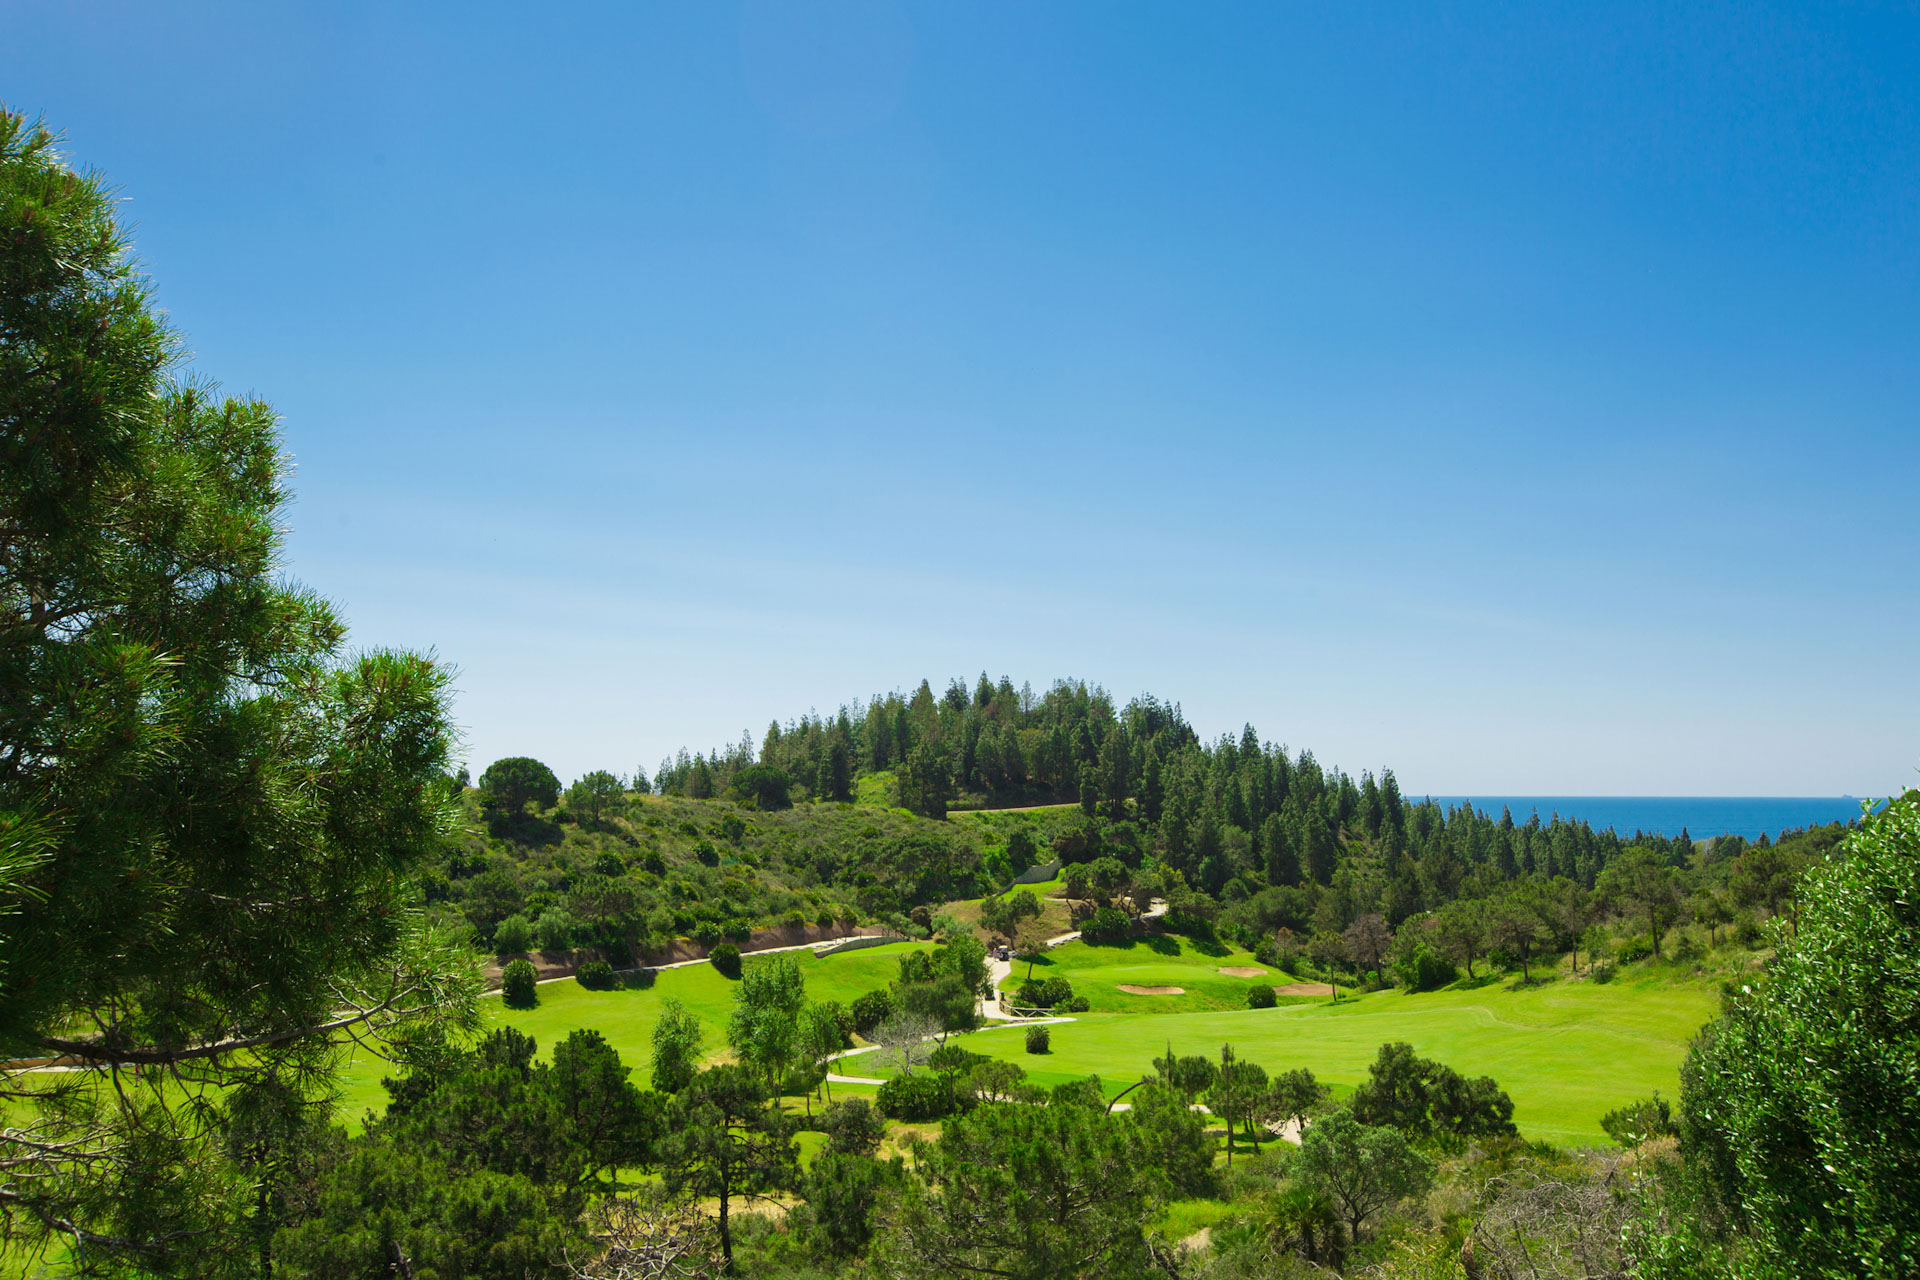 Overview at Chaparral Golf Course, Marbella, Costa del Sol, Spain. Golf Planet Holidays.